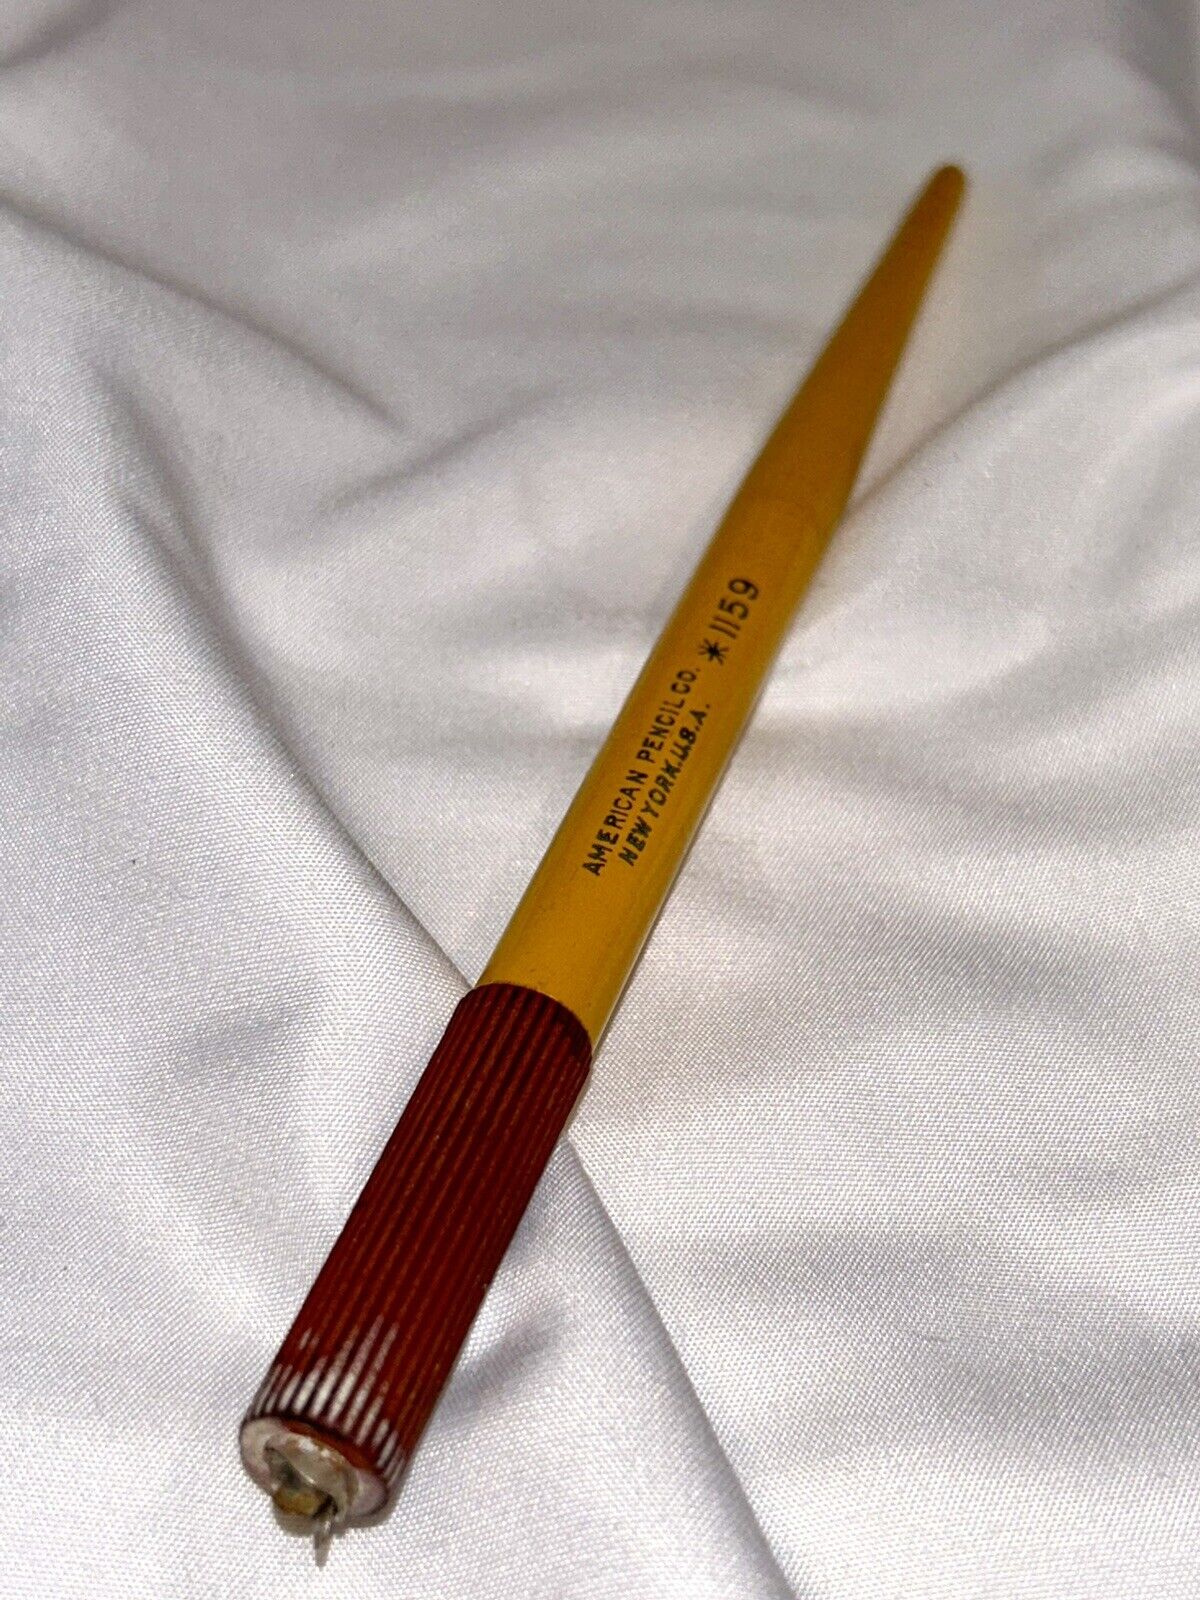 Vintage American Pencil Co 1159 Quill Yellow Rare New York USA 🇺🇸